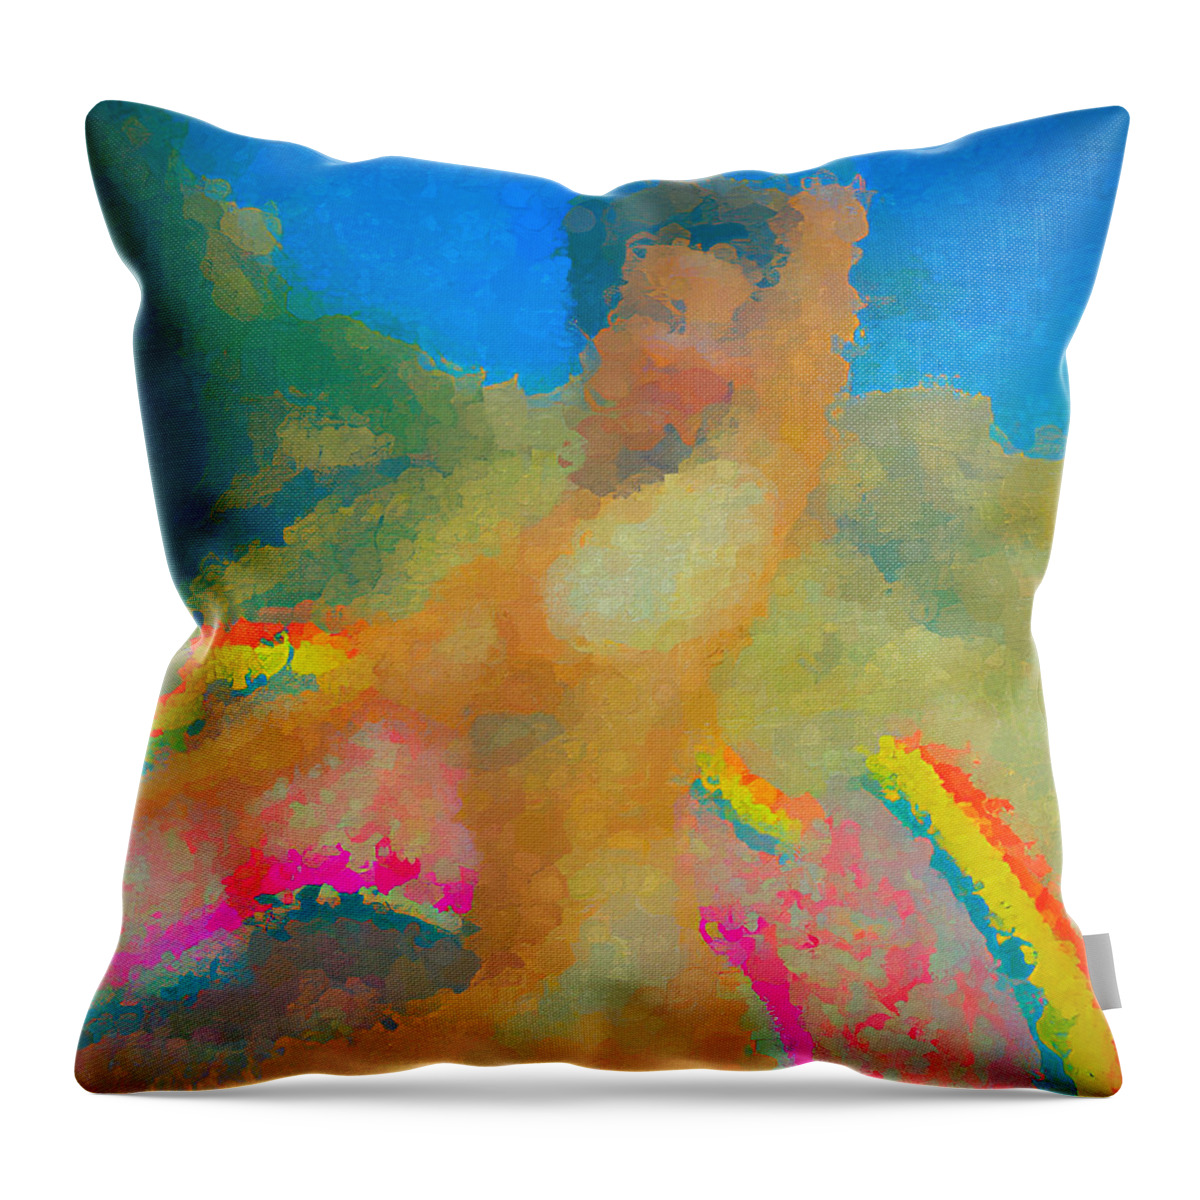 Abstract Nude Throw Pillow featuring the digital art Sunny Bright Abstract by Cathy Anderson